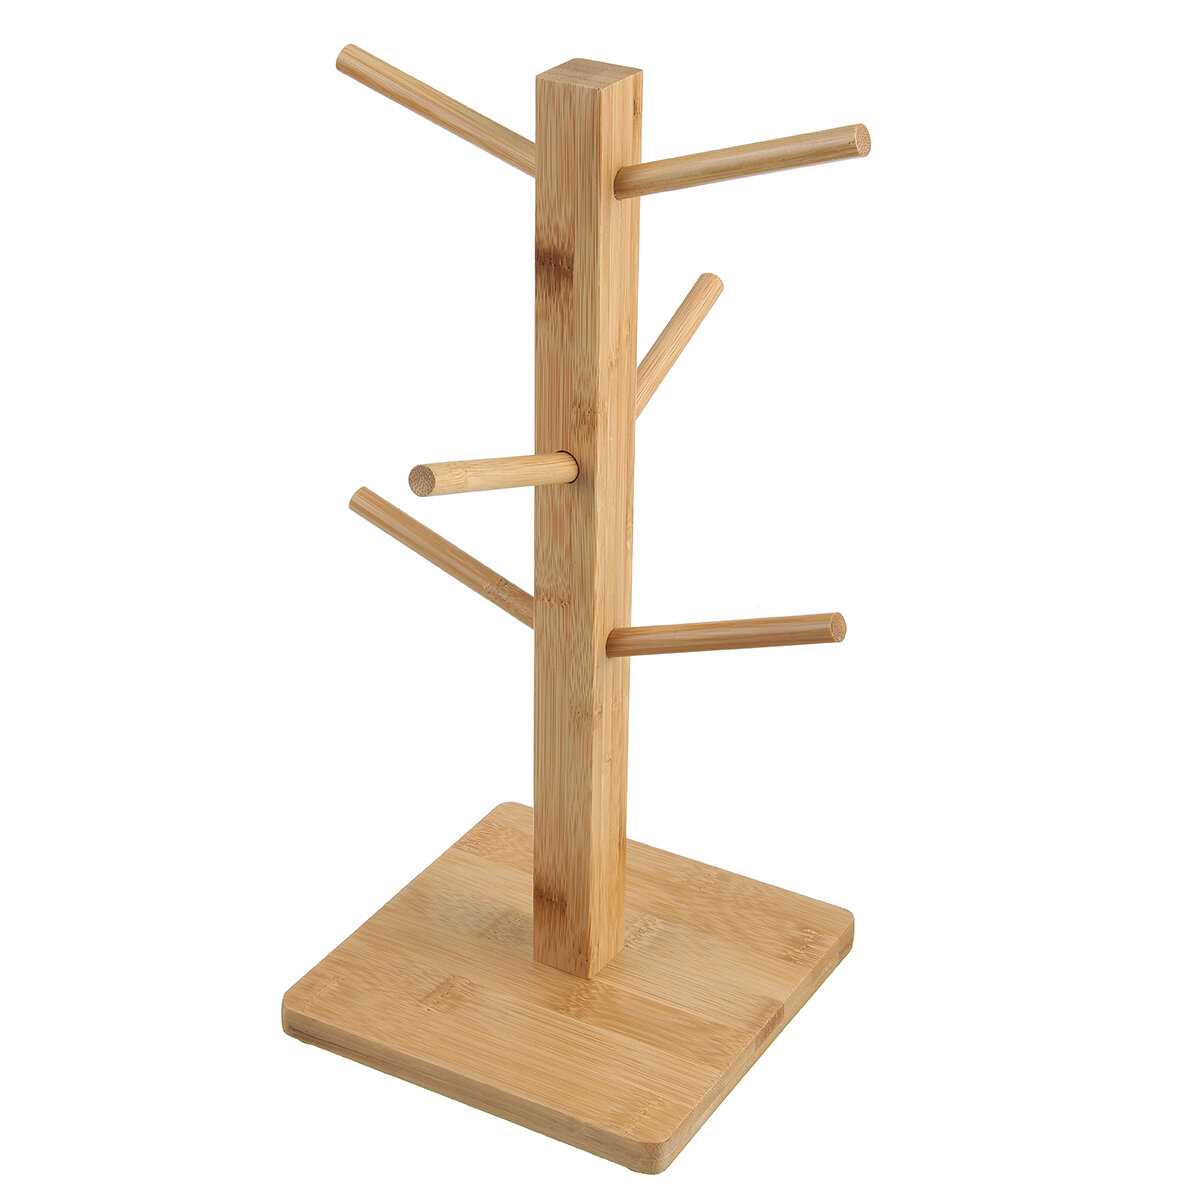 Wooden Cup Holder Teacup Mug Drain Rack Stand 6 Cups Drain Cup Hanging Stand Coffee Cup Display Stan